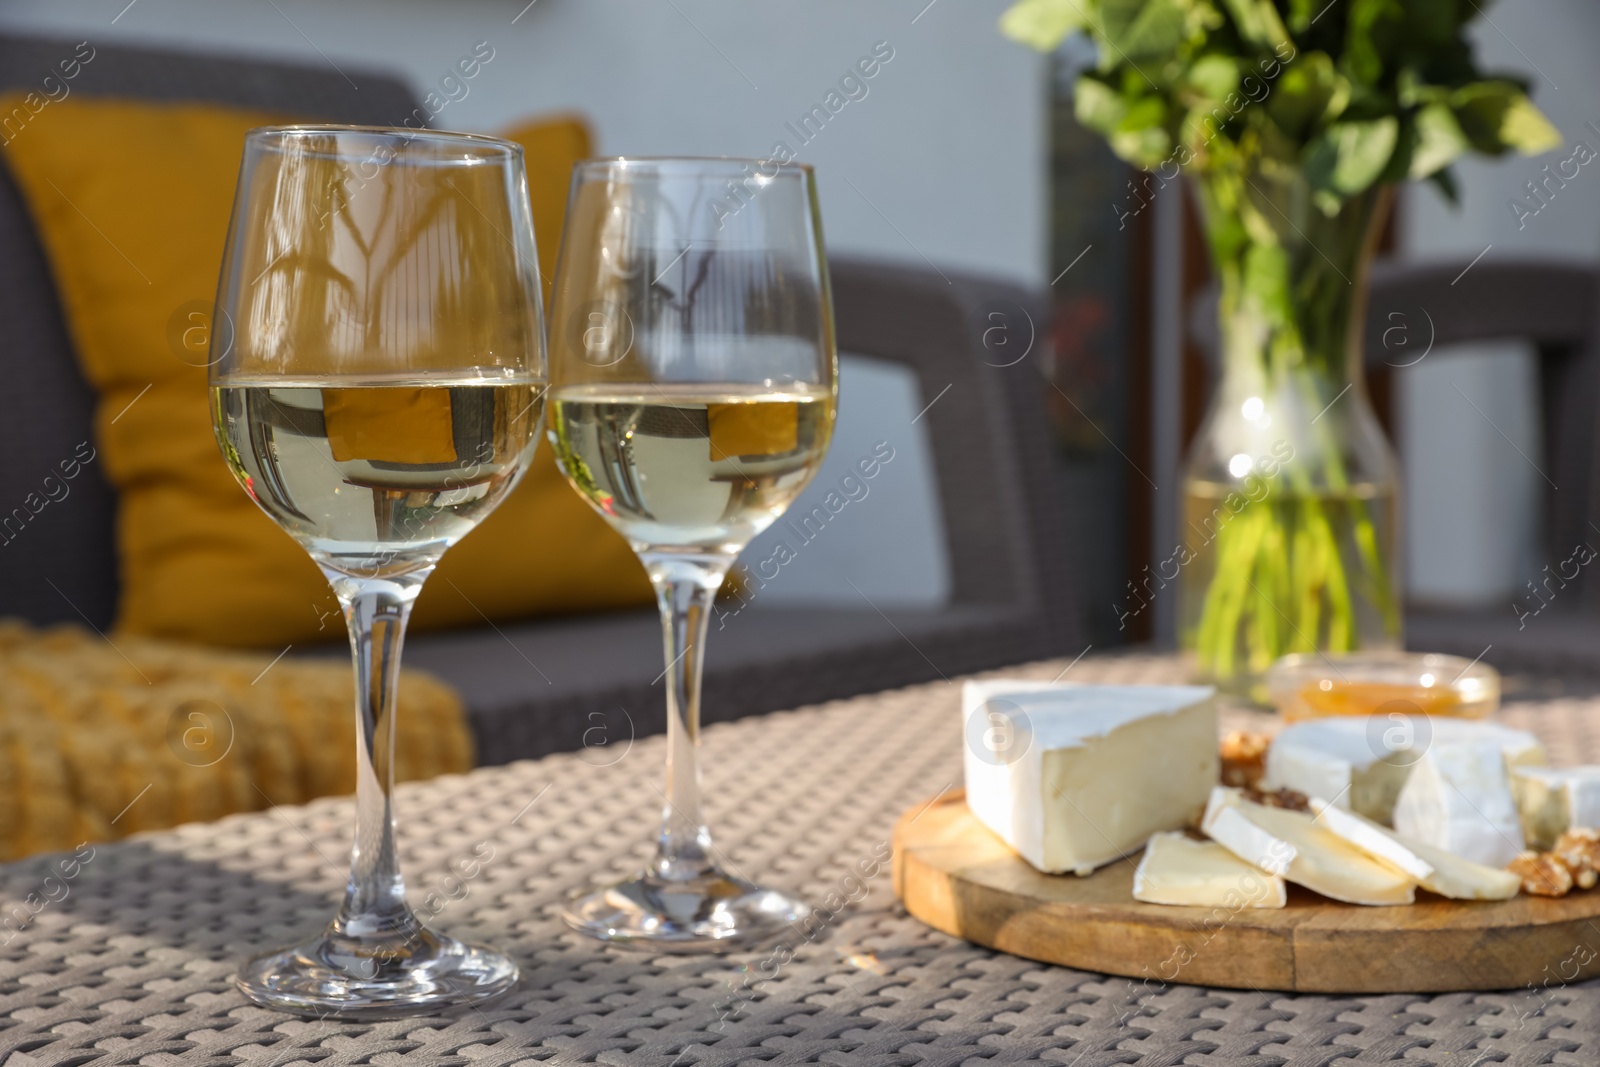 Photo of Glasses of wine, snacks and vase with flowers on rattan table at balcony, closeup